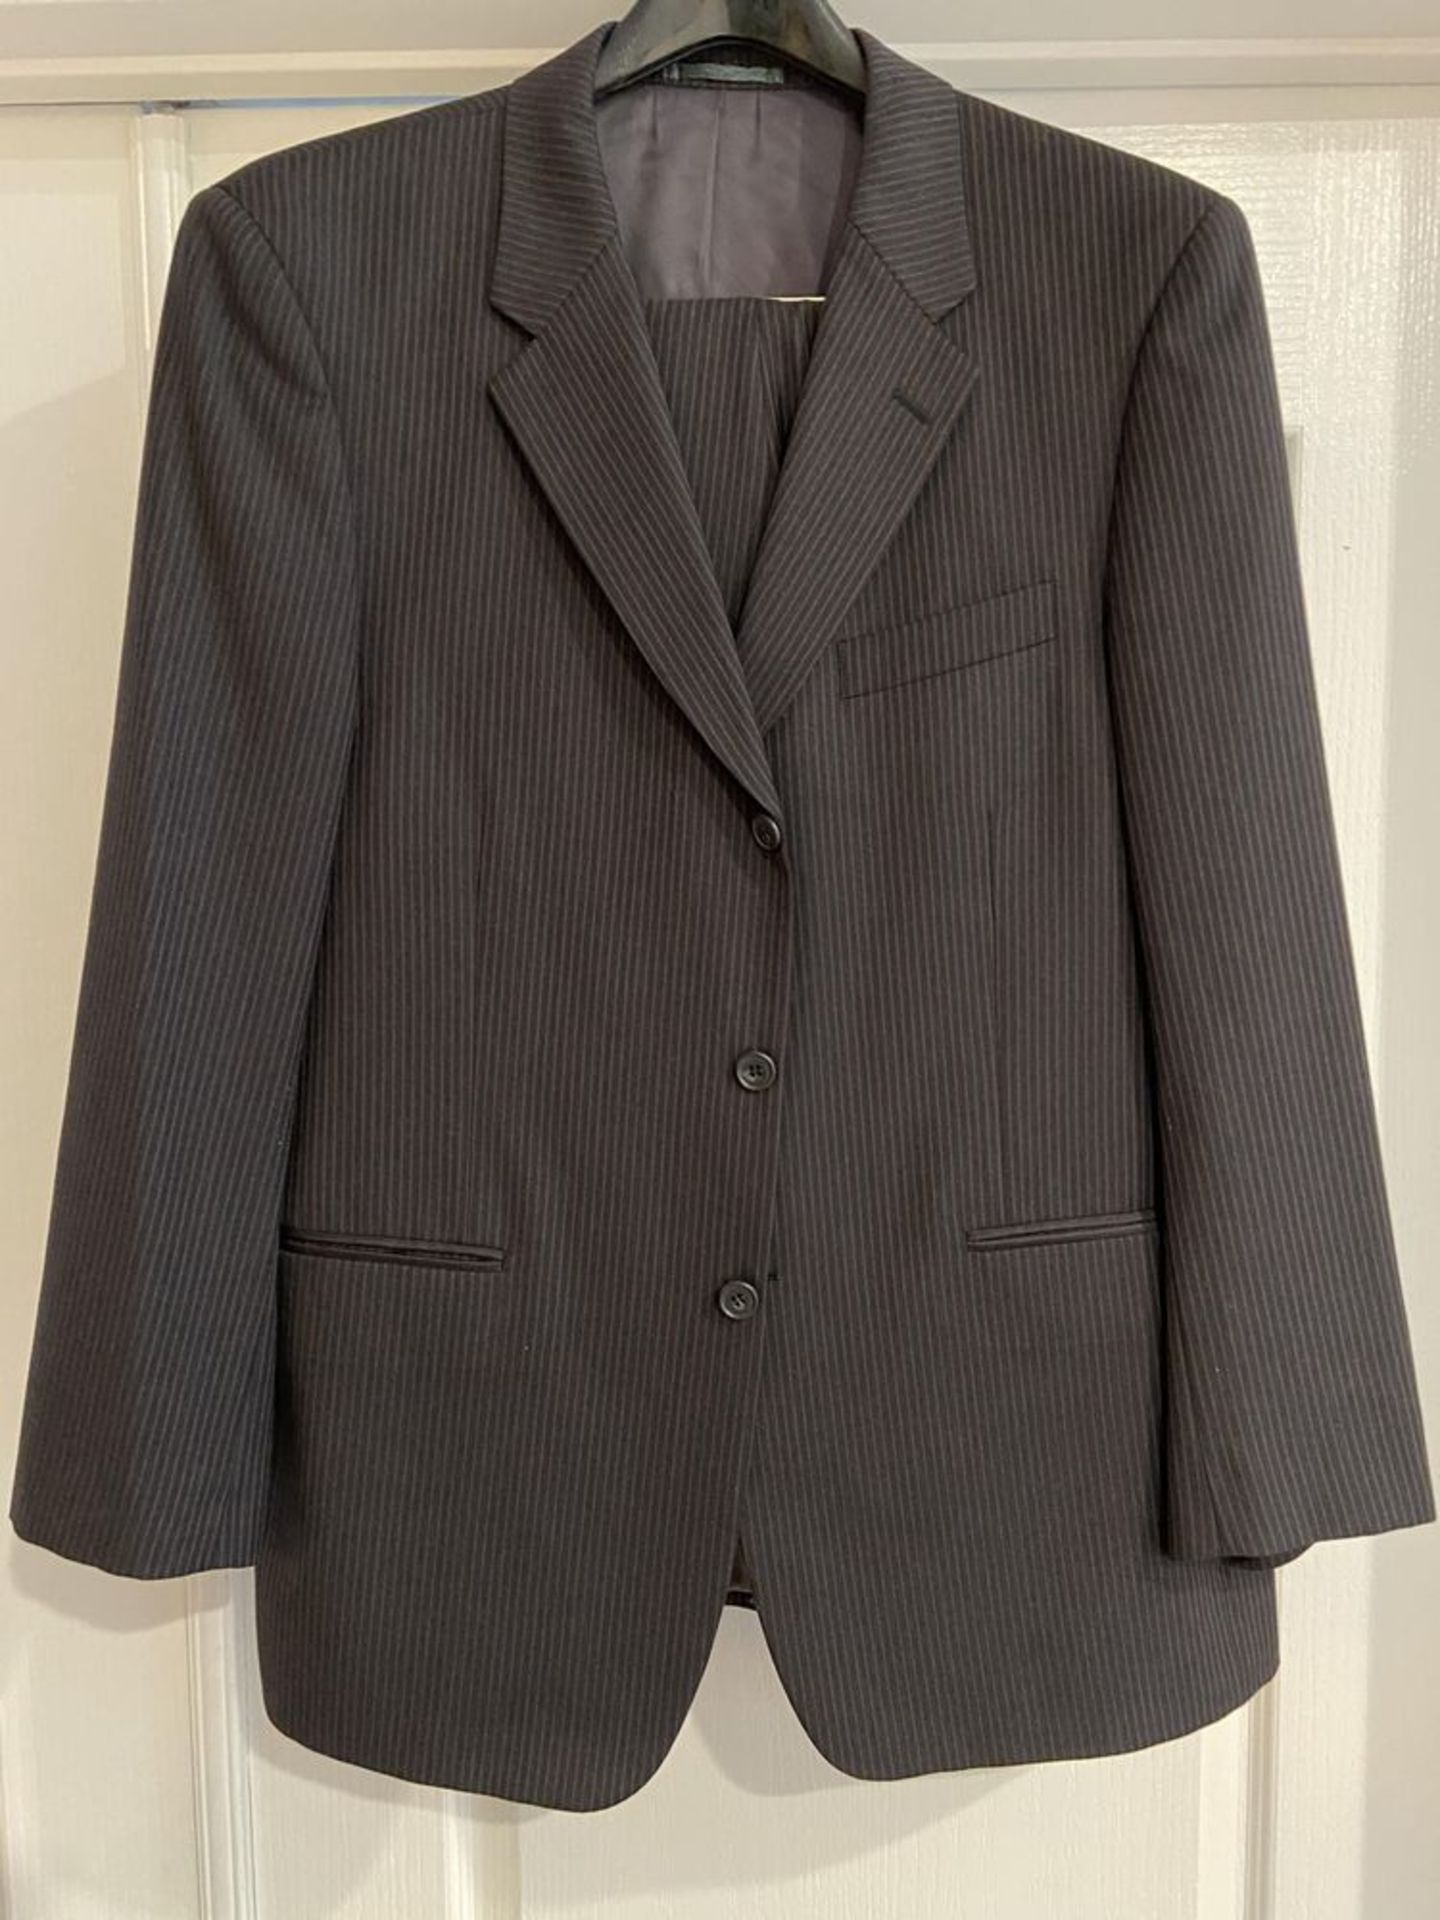 Collection of High End Men's Clothing: 6 Suits Size 42R, 1 Sport Jacket Size 42R, 1 Polo XL - Bild 4 aus 18